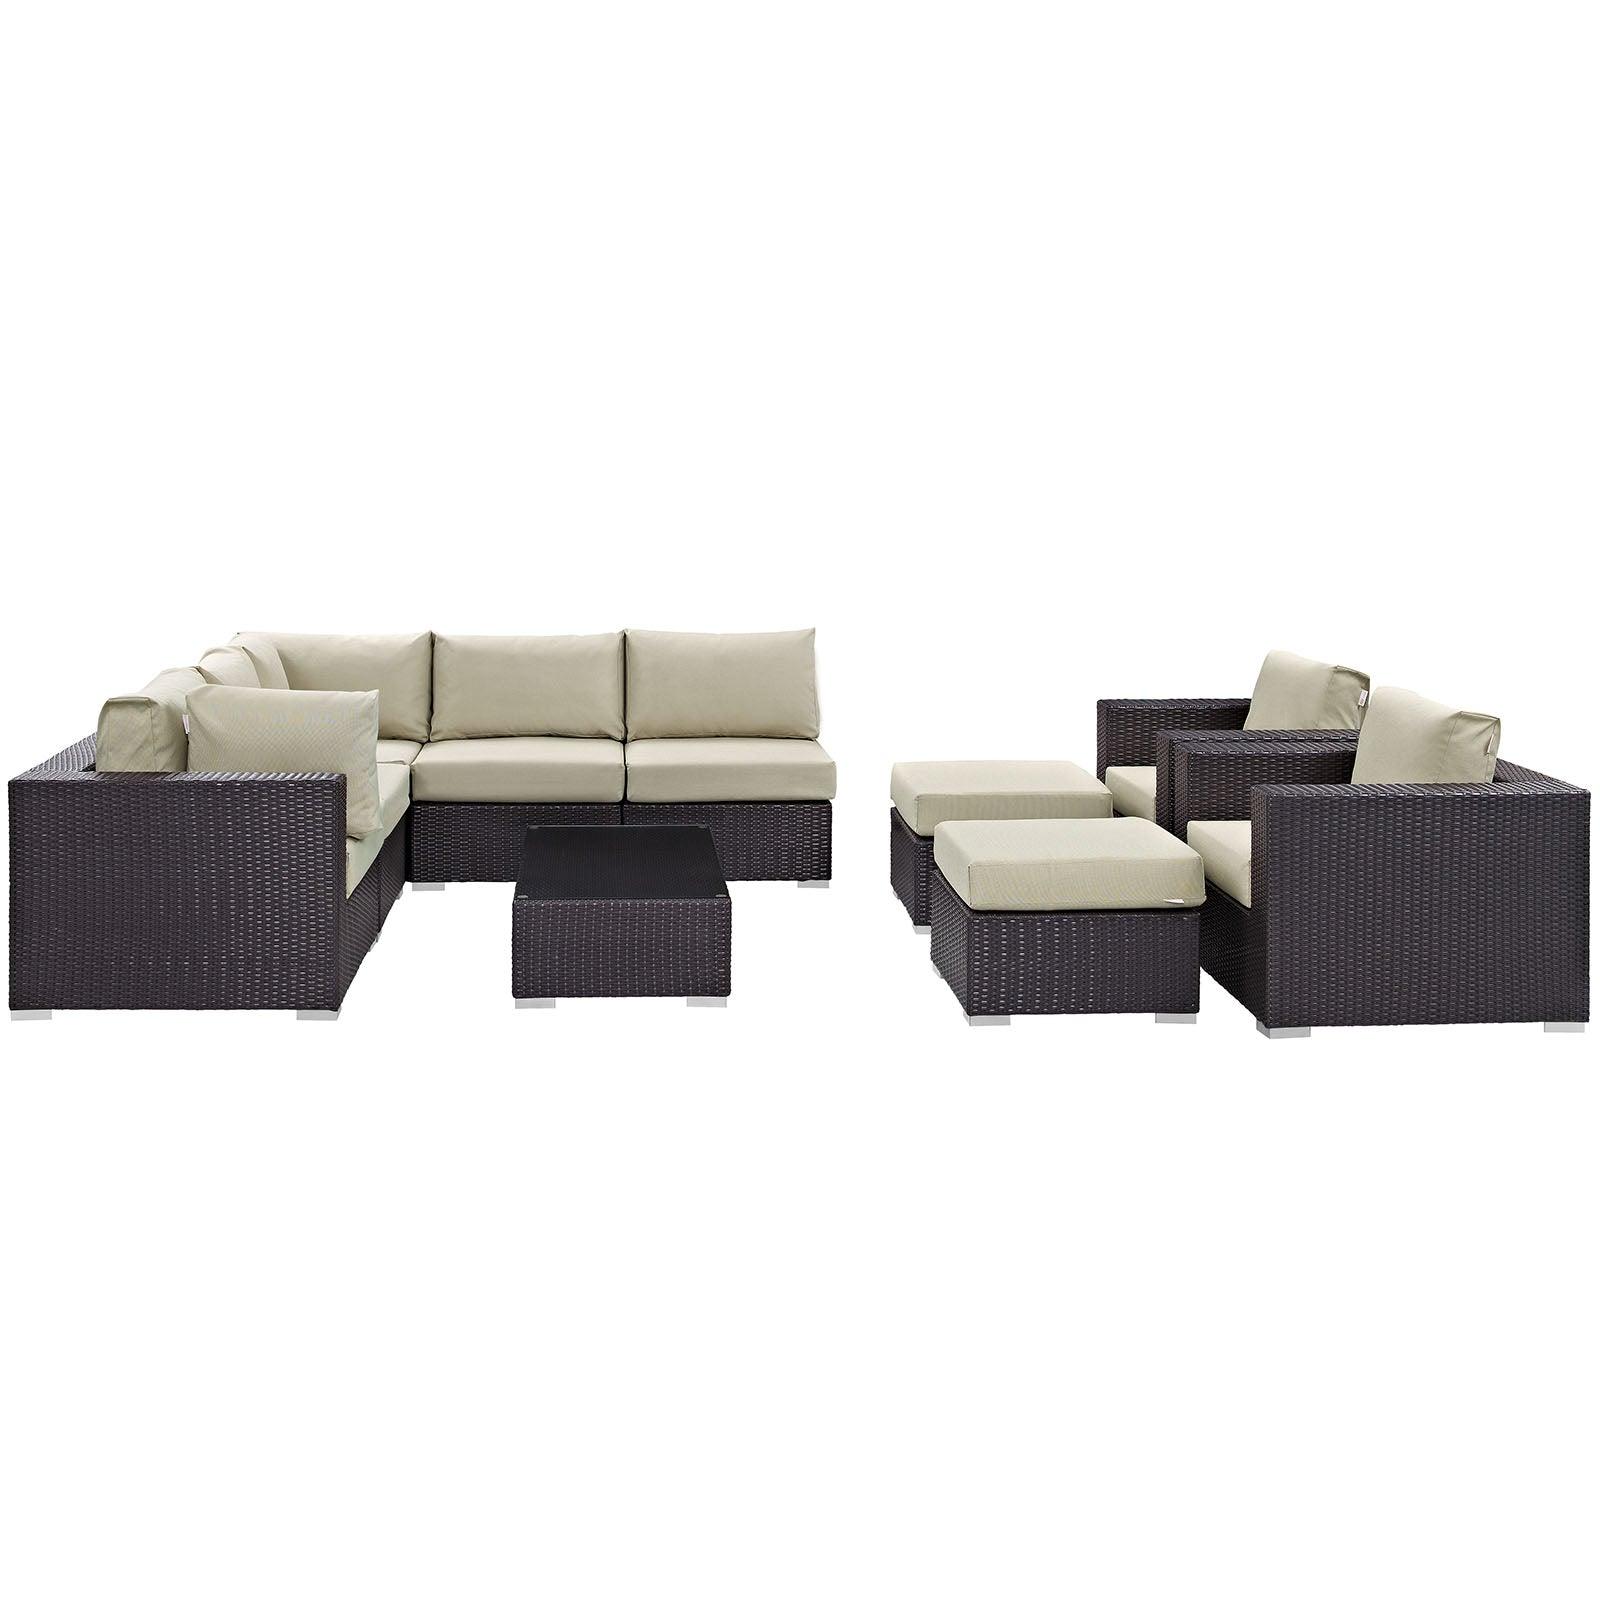 Modway Convene 10 Piece Outdoor Patio Sectional Set FredCo